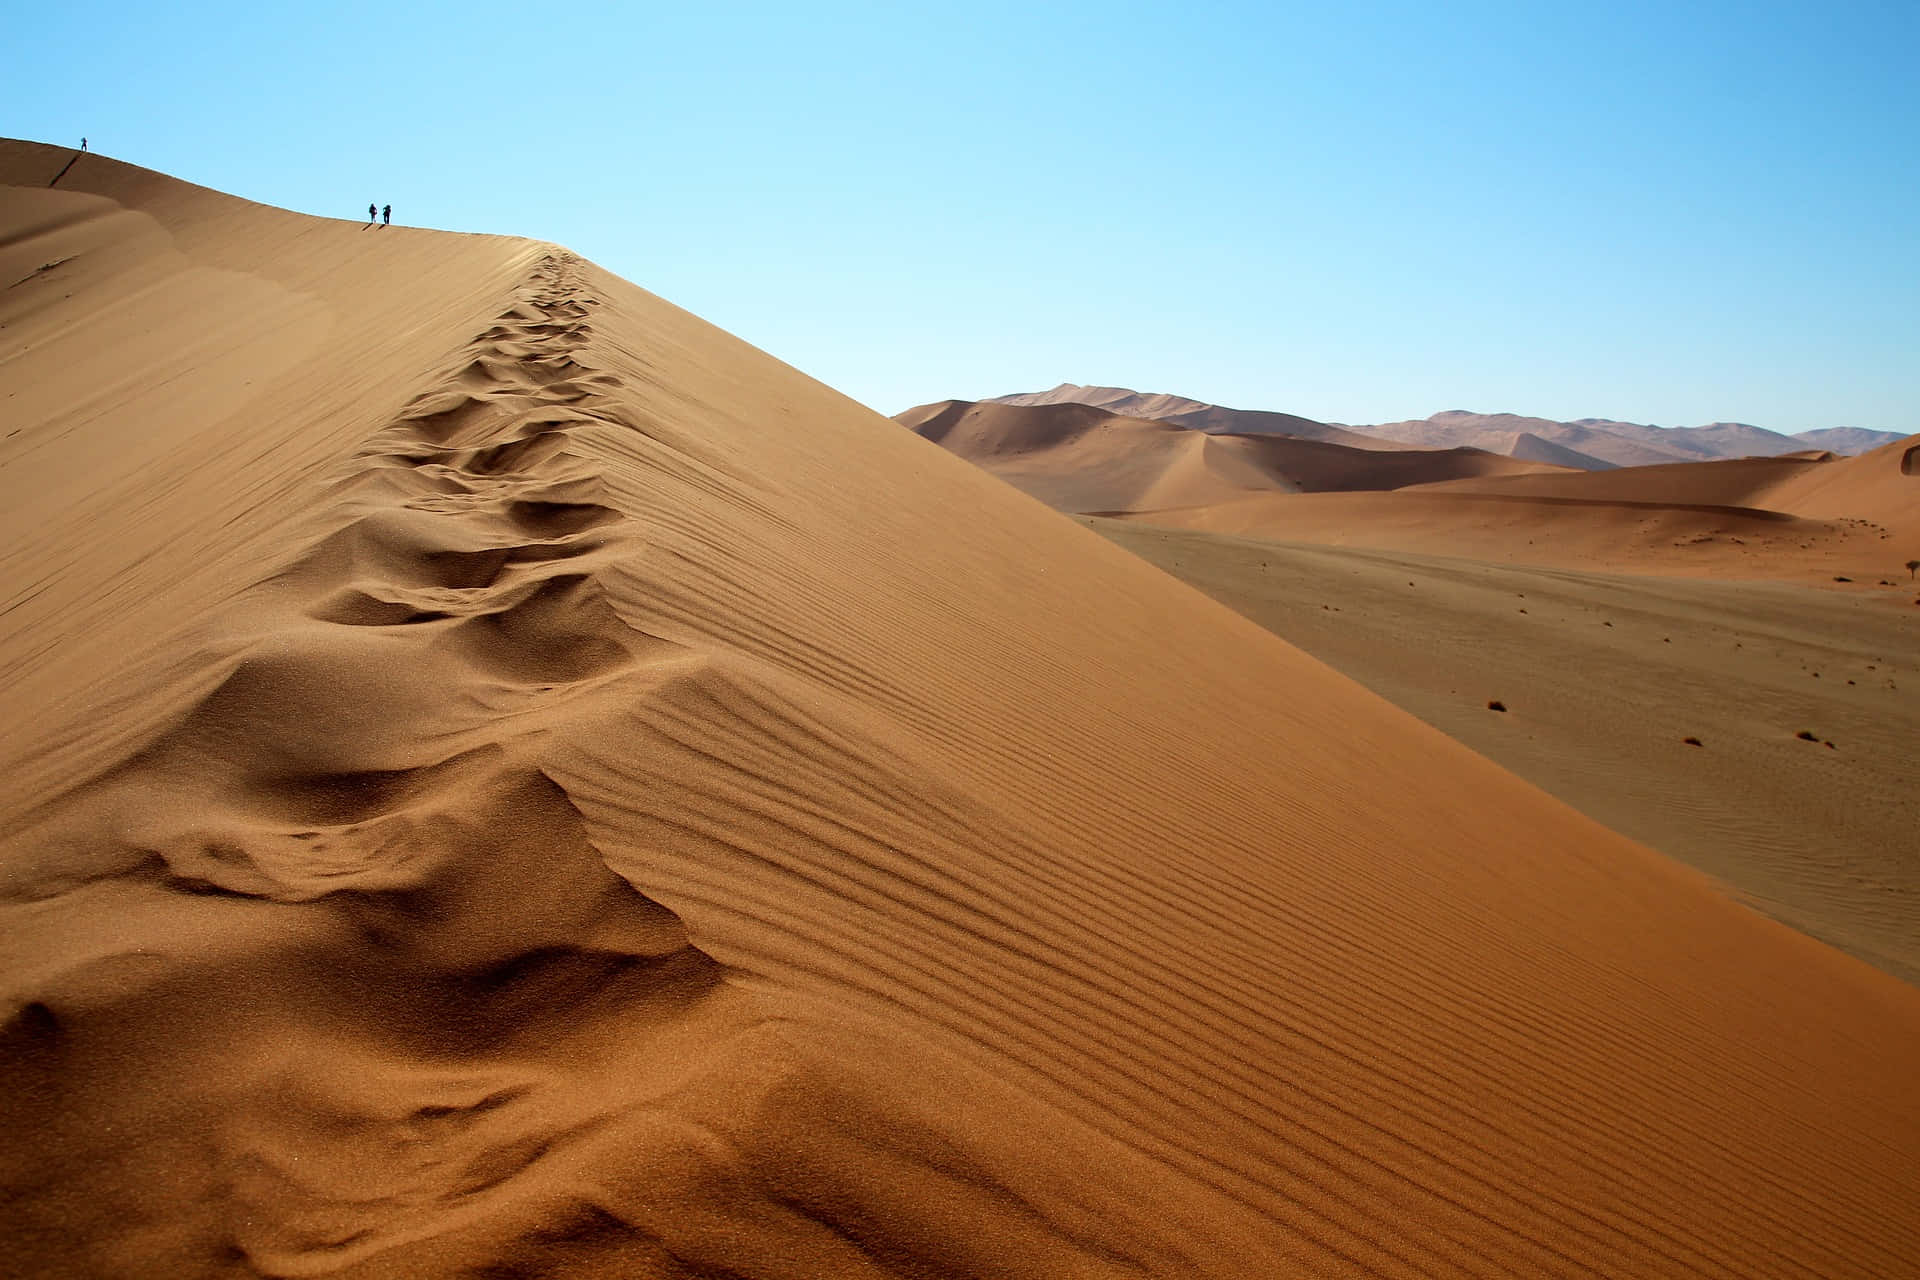 The dazzling spectacle of the sand dunes